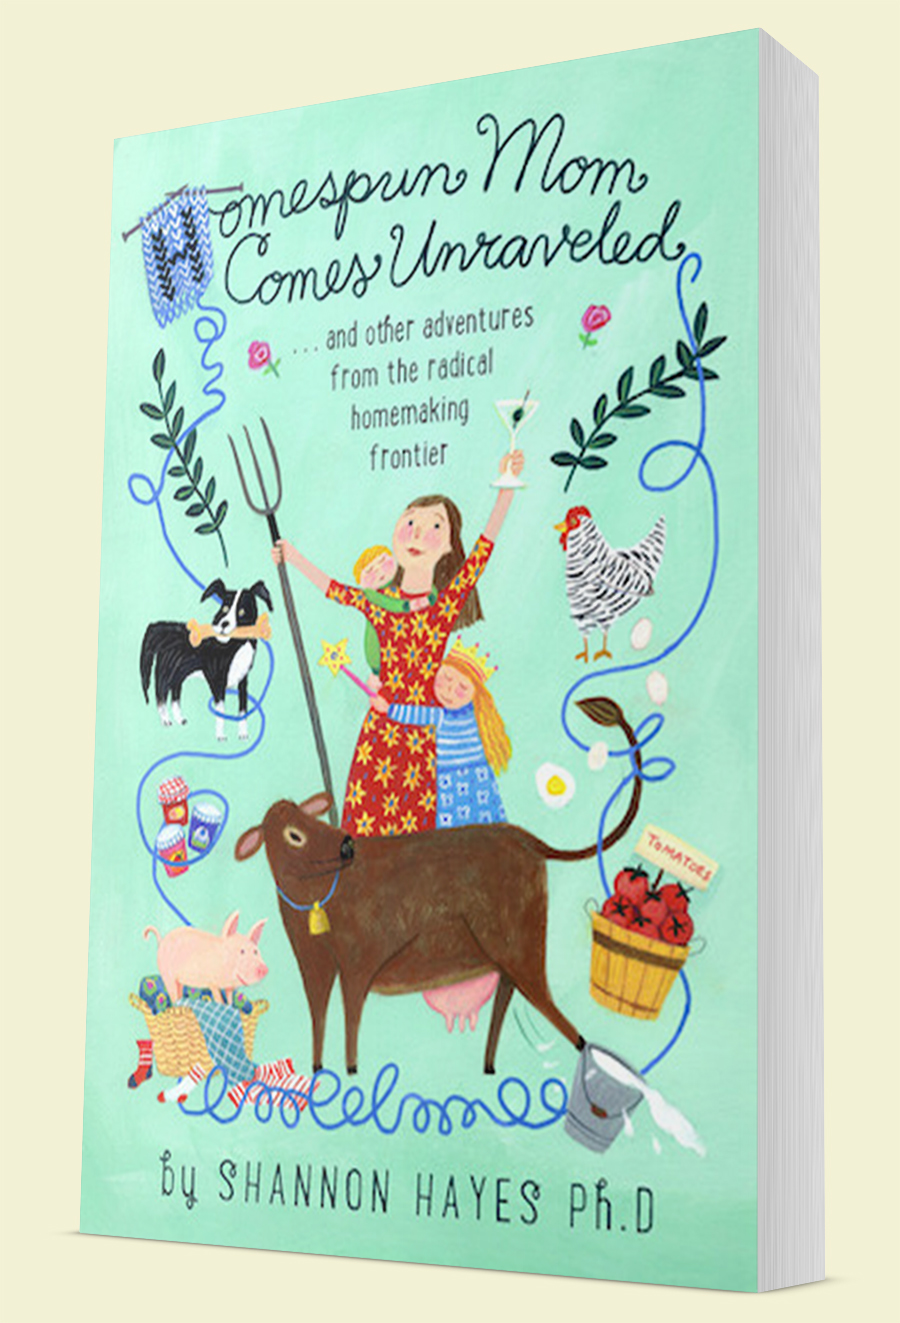 Homespun Mom Comes Unraveled by Shannon Hayes